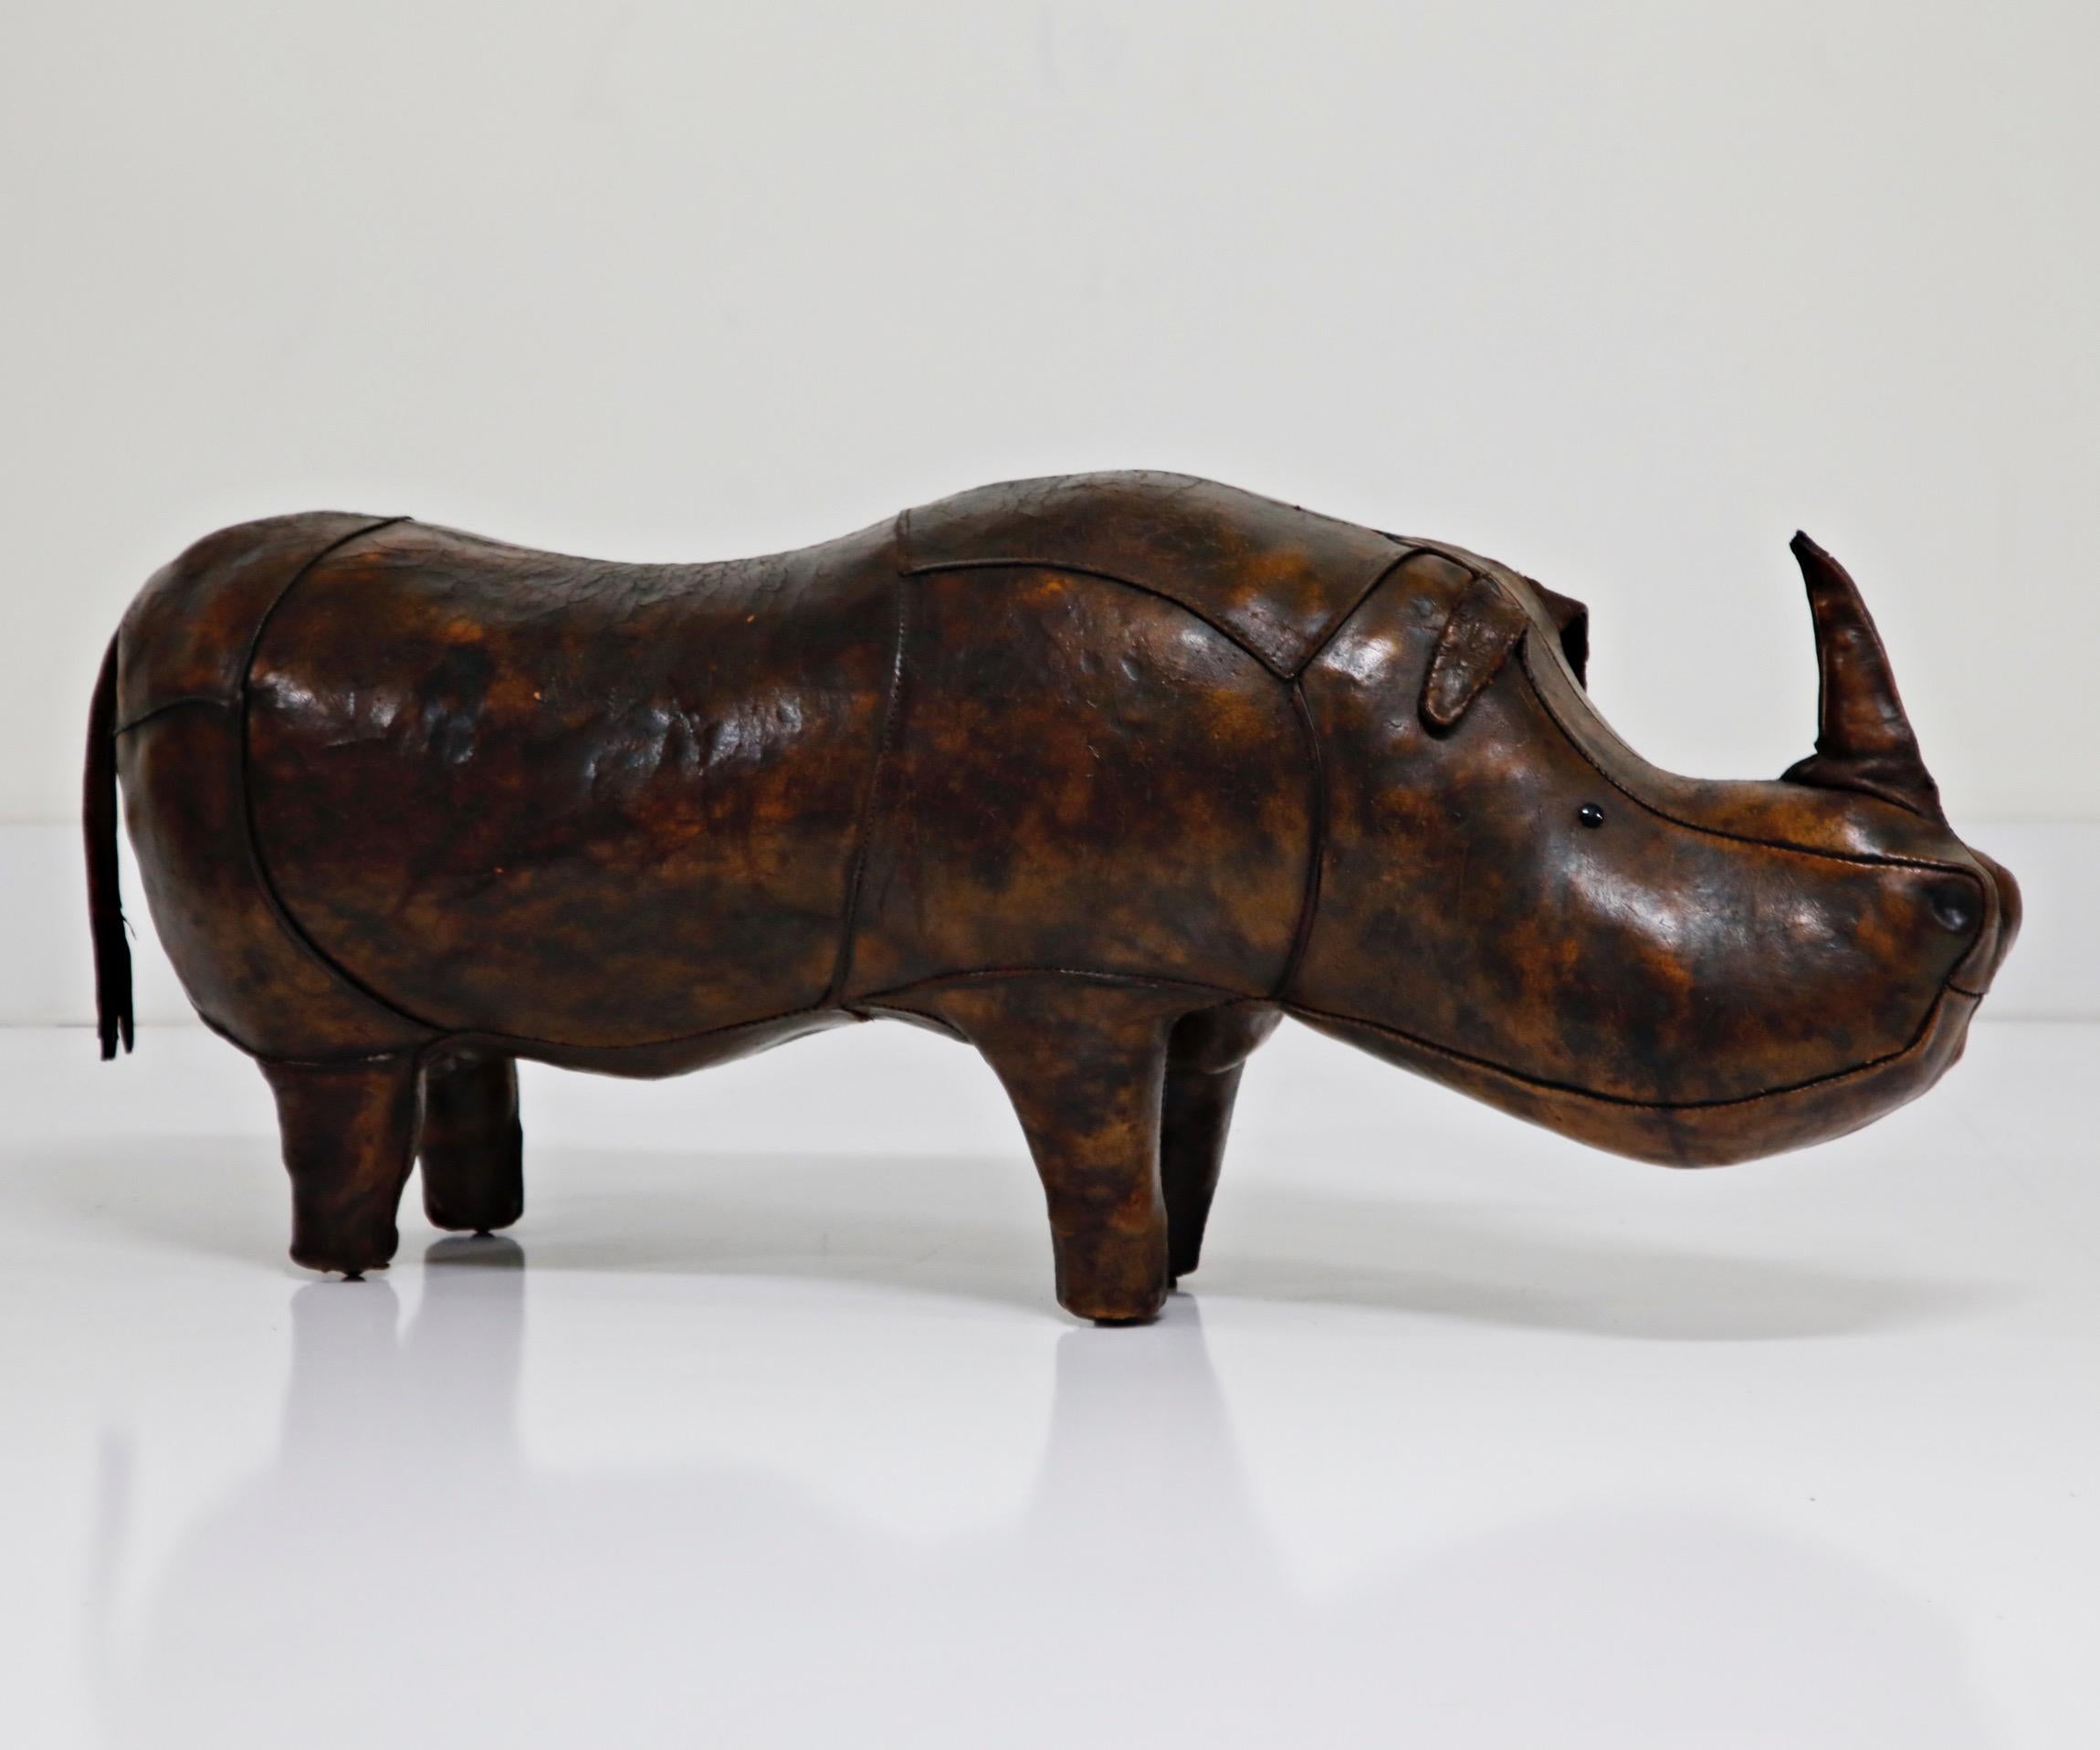 A wonderful example of the large version rhinoceros by Dimitri Omersa for Abercrombie and Fitch, circa 1950s. This example is signed with the Made in England label, and is in beautiful lightly distressed condition with light craquelure throughout.